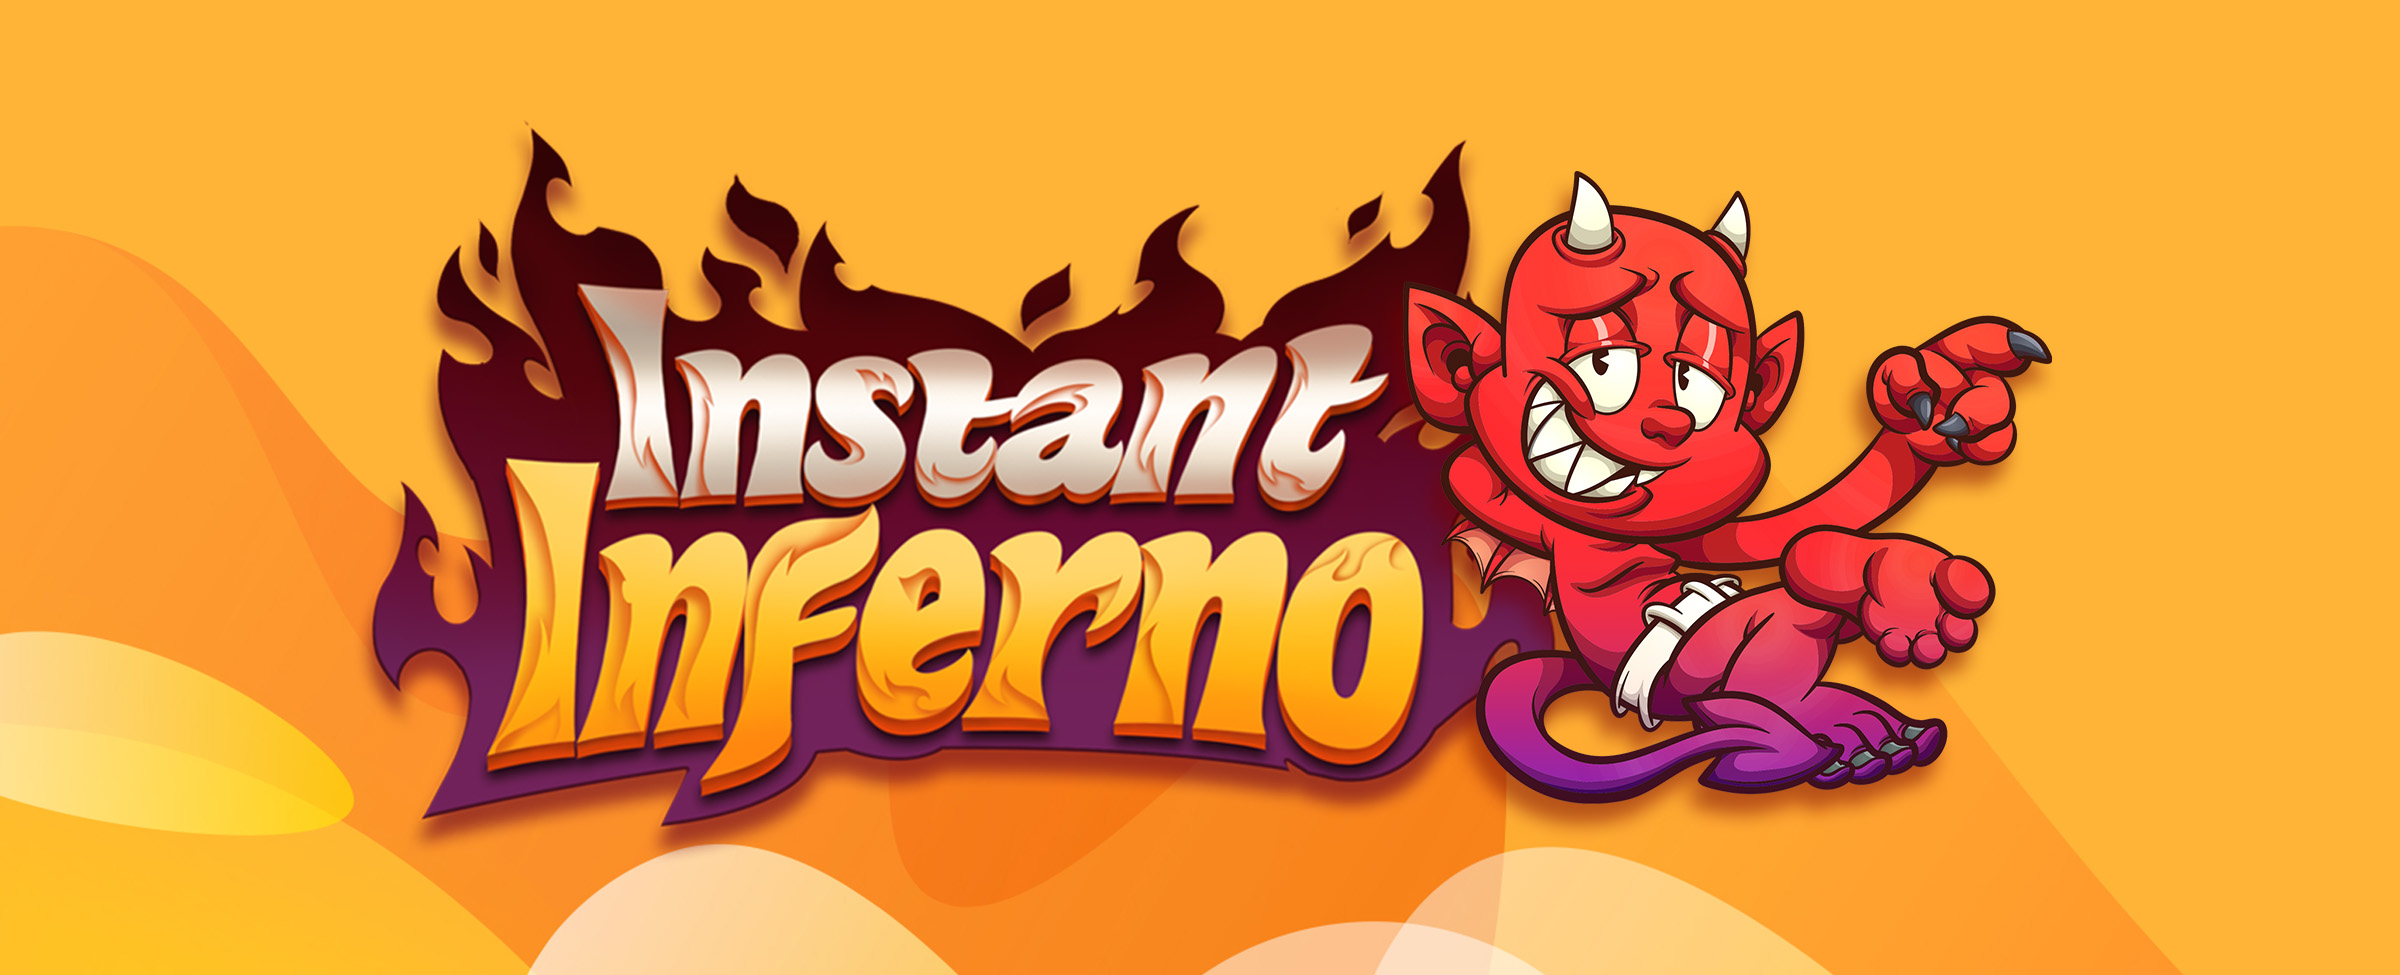 Well, do we have a treat for our lucky SlotsLV players! Today we’re reviewing Instant Inferno - a high-octane, adventure-packed slot game that may just become your new favorite. Let’s go!